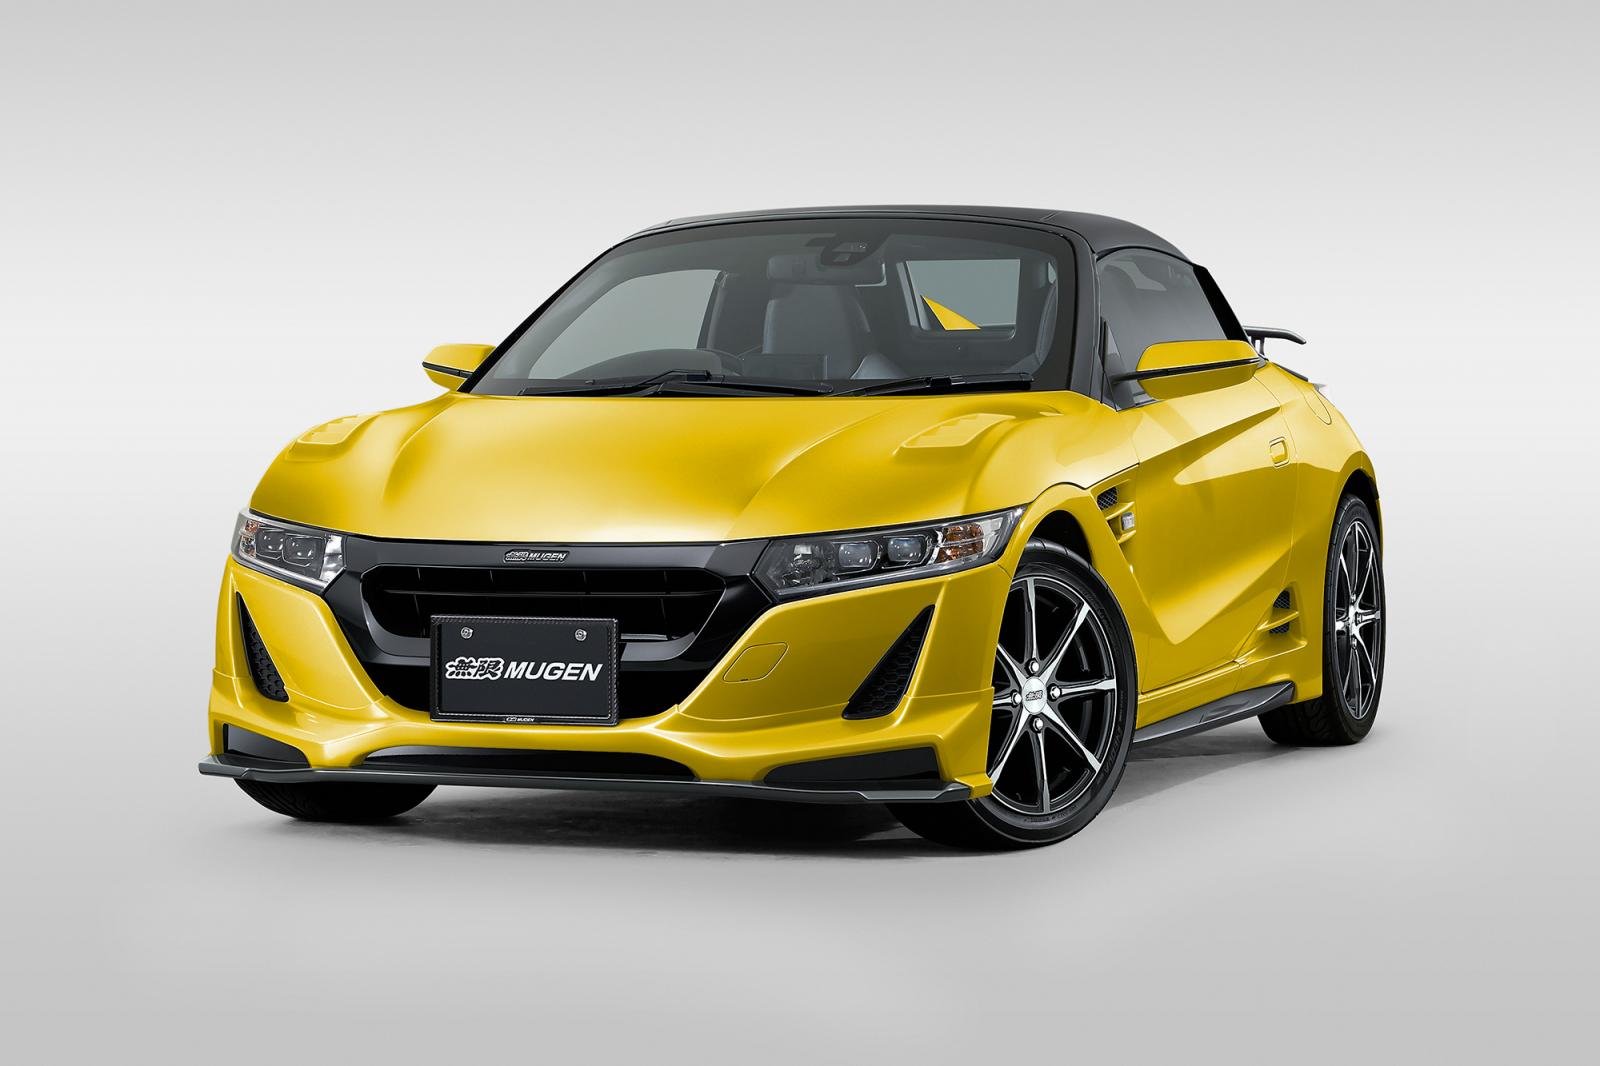 Honda S660 Type R Cars Convertible 15 Wallpapers Hd Desktop And Mobile Backgrounds